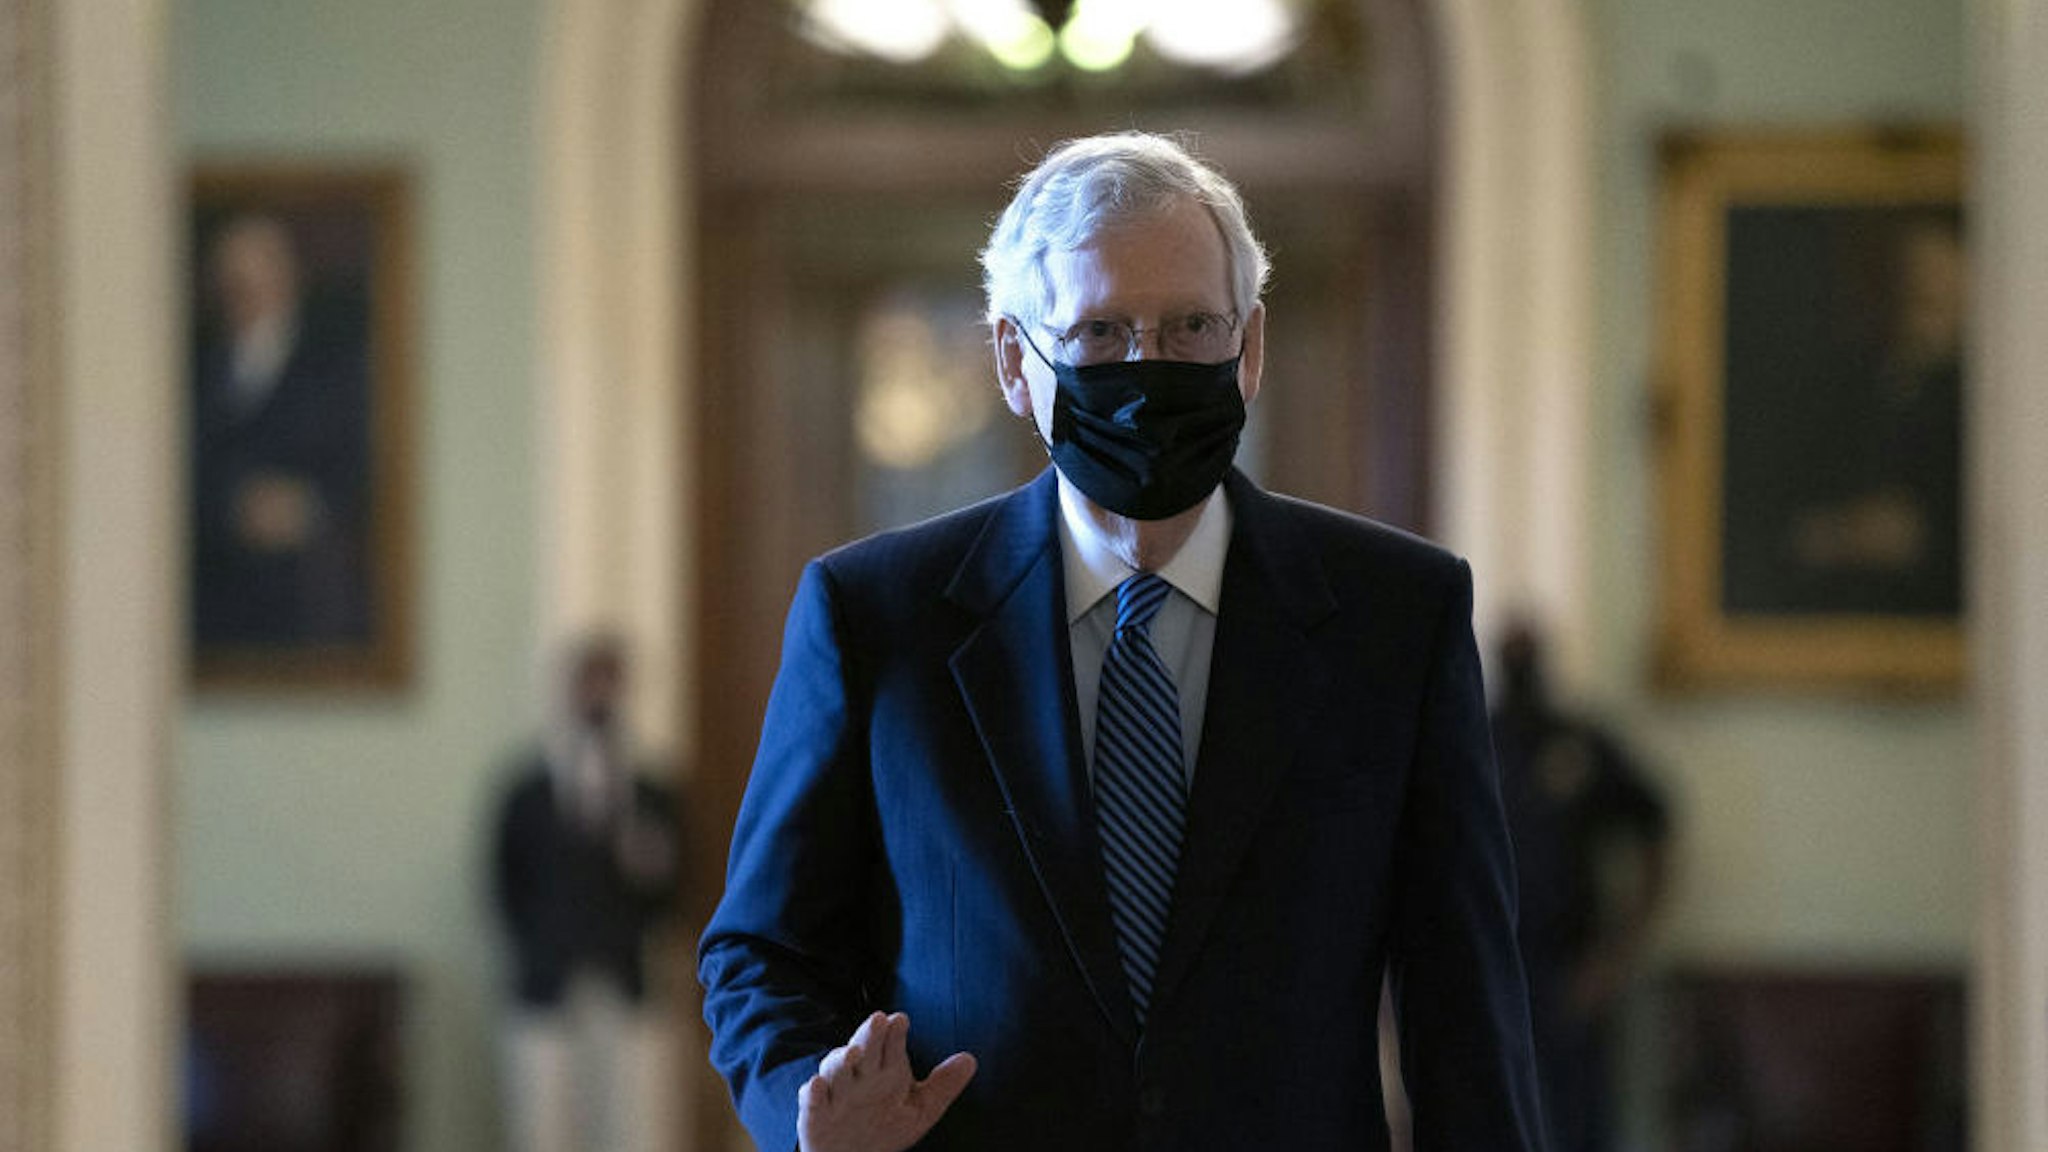 Senate Majority Leader Mitch McConnell, a Republican from Kentucky, center, wears a protective mask as he walks to his office at the U.S. Capitol in Washington, D.C., U.S., on Tuesday, Sept. 15, 2020. A 50-member group of House Democrats and Republicans will release a $1.52 trillion coronavirus stimulus plan today in a long-shot attempt to break a months-long deadlock on providing relief to the pandemic-battered U.S. economy.